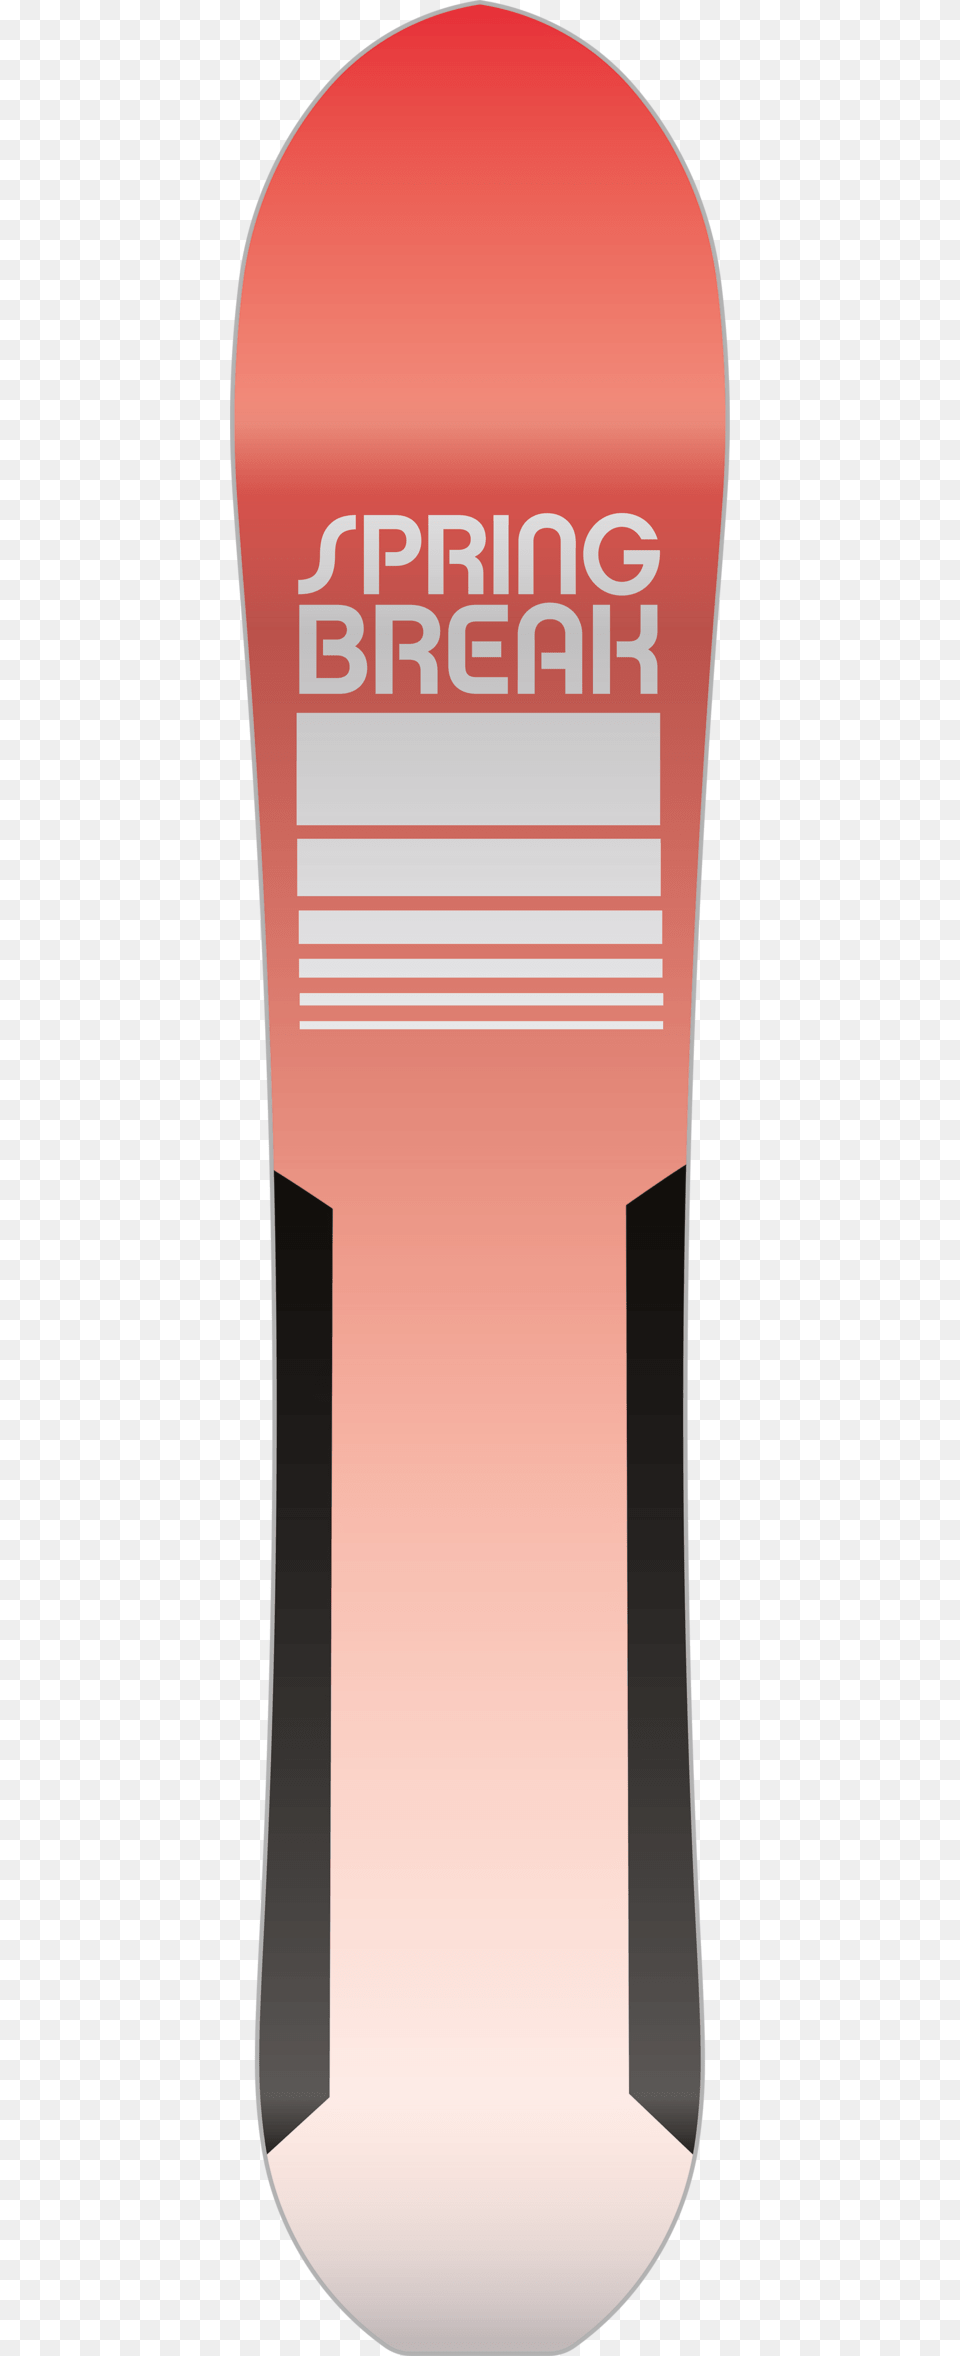 Paper Product, Electrical Device, Microphone, Bottle, Racket Png Image